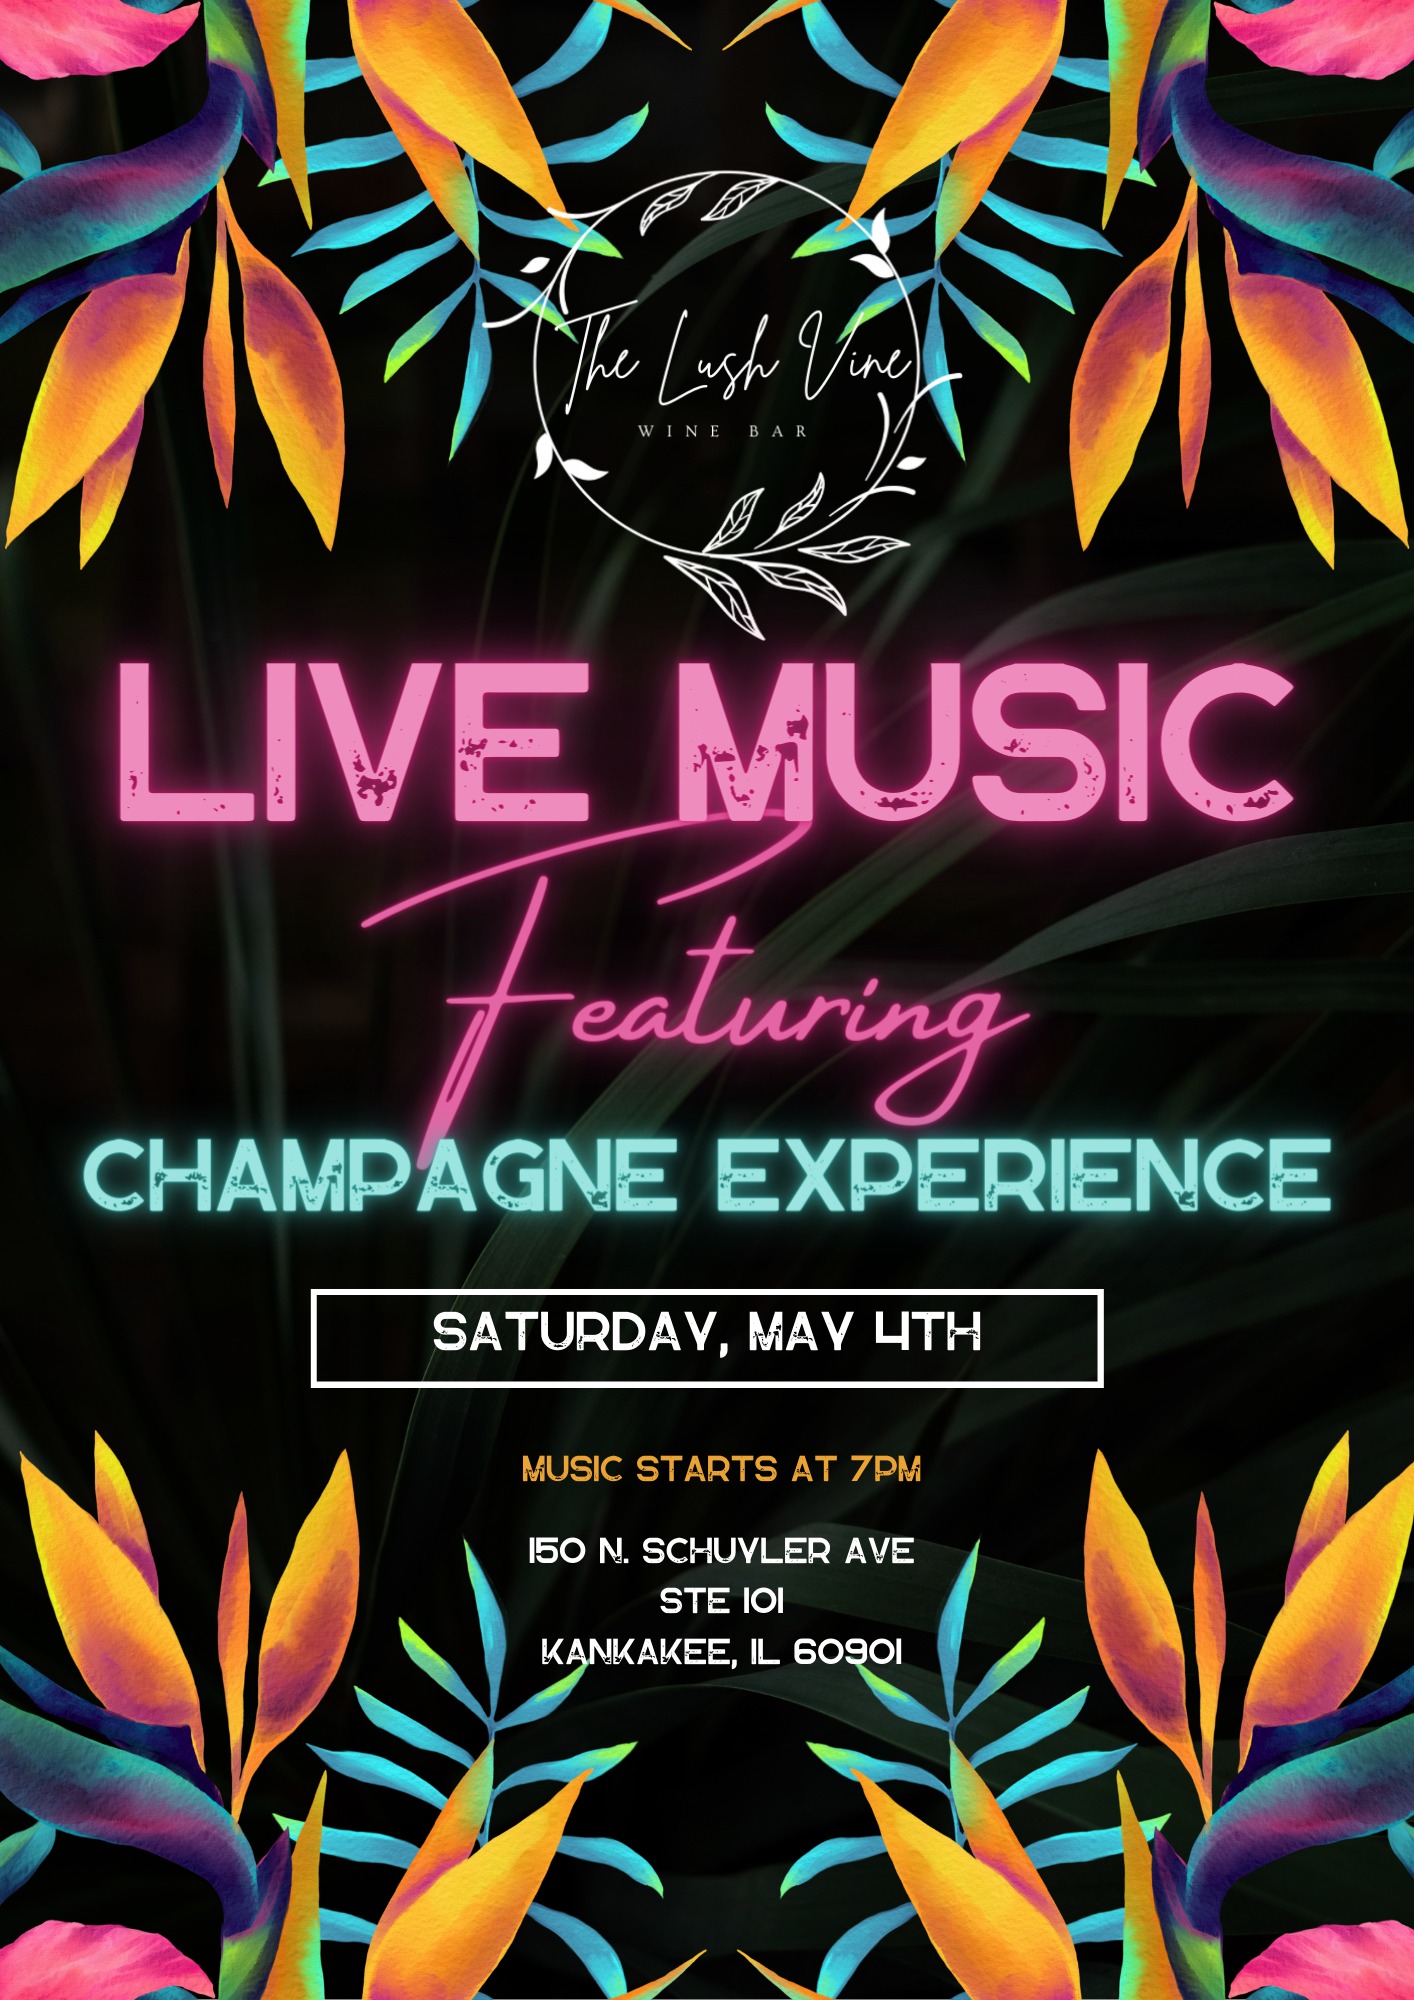 Champagne Experience- Live music